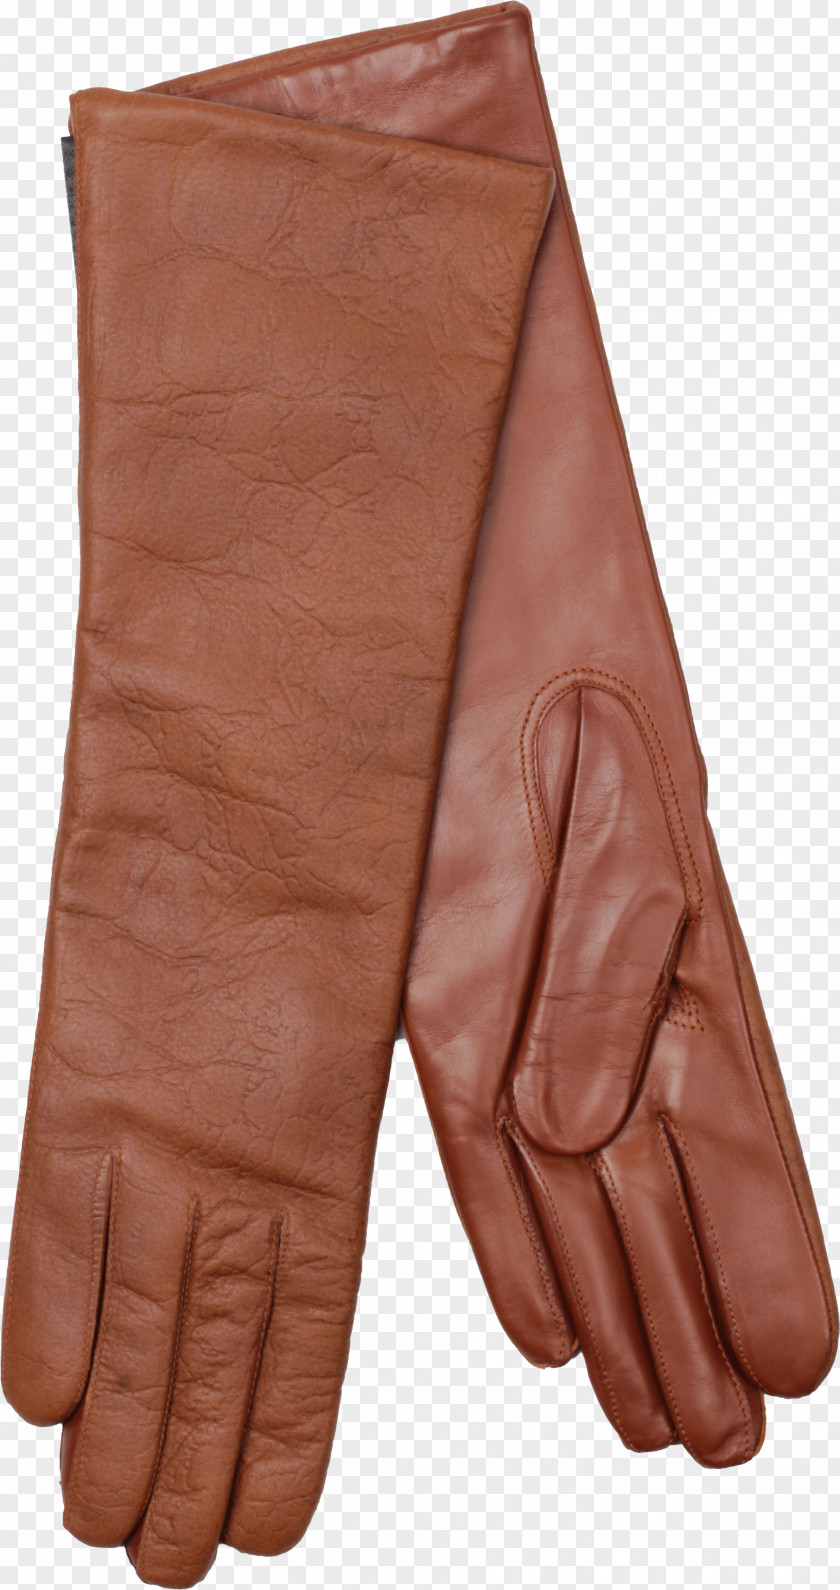 Gloves Glove Clothing Leather Clip Art PNG